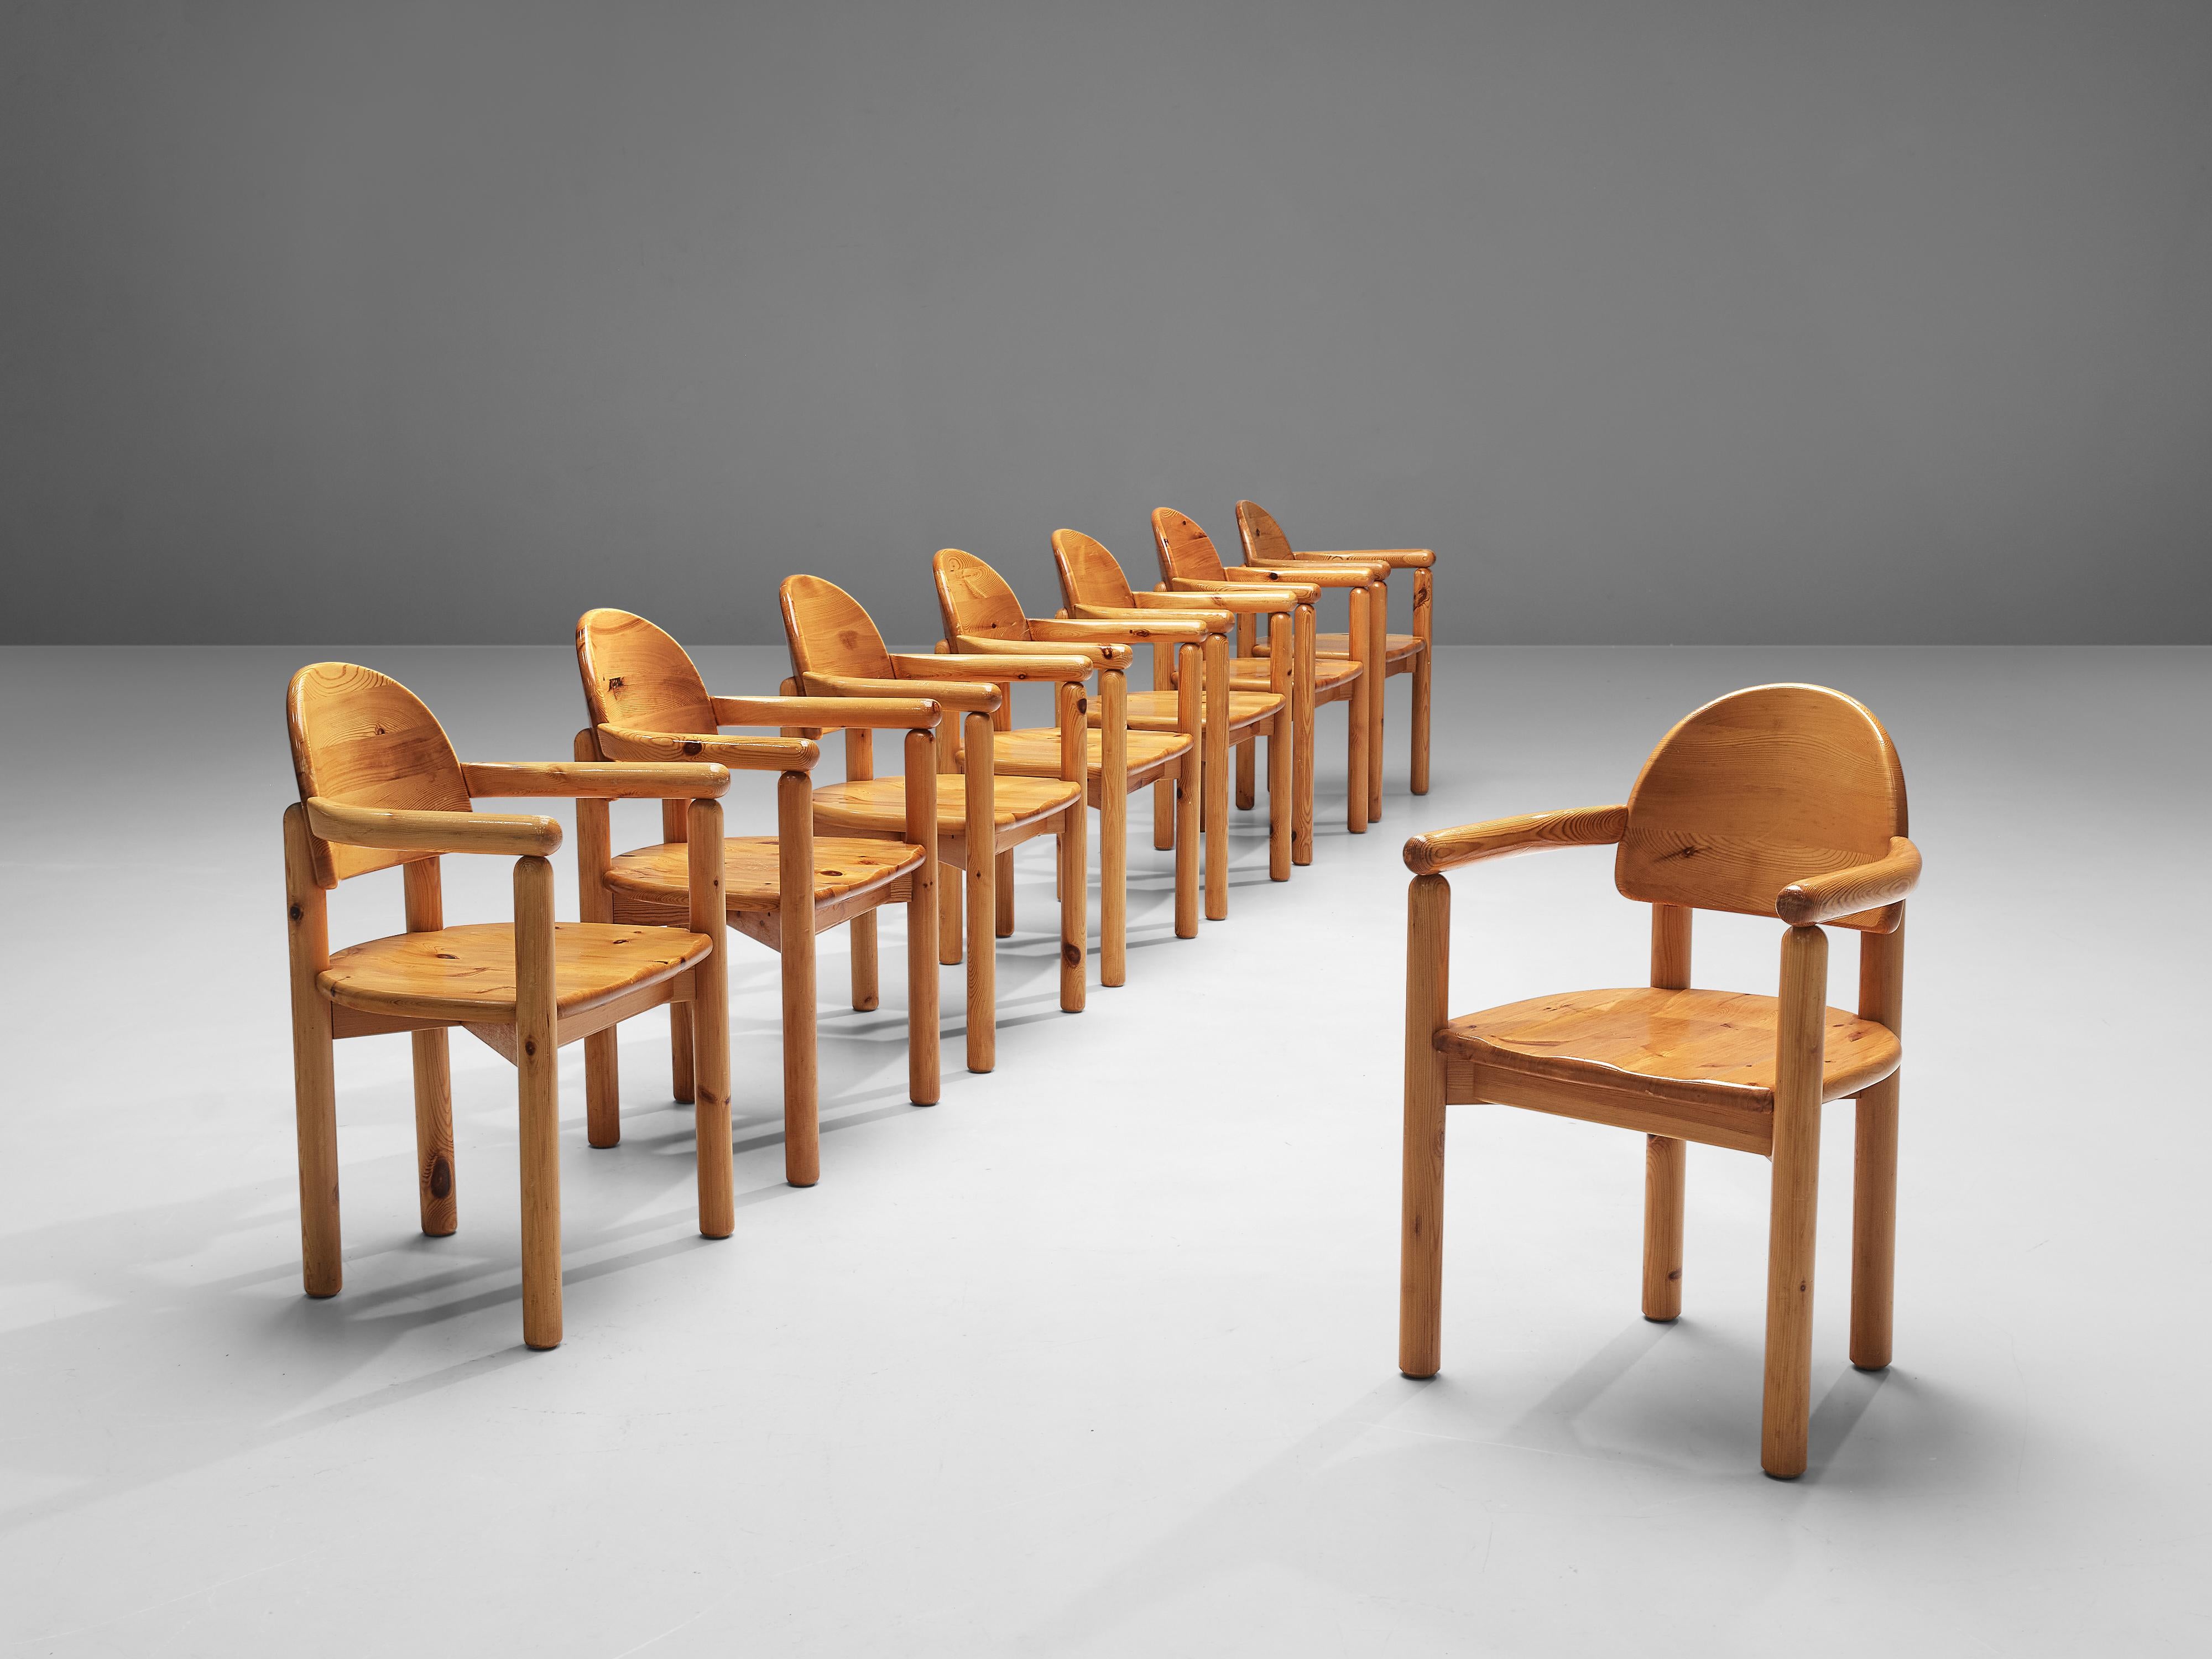 Rainer Daumiller for Hirtshals Savvaerk, set of eight armchairs, pine, Denmark, 1970s
 
These dining chairs by Danish designer Rainer Daumiller have multiple beautiful features. The vivid grain of the warm pine wood contributes to the natural